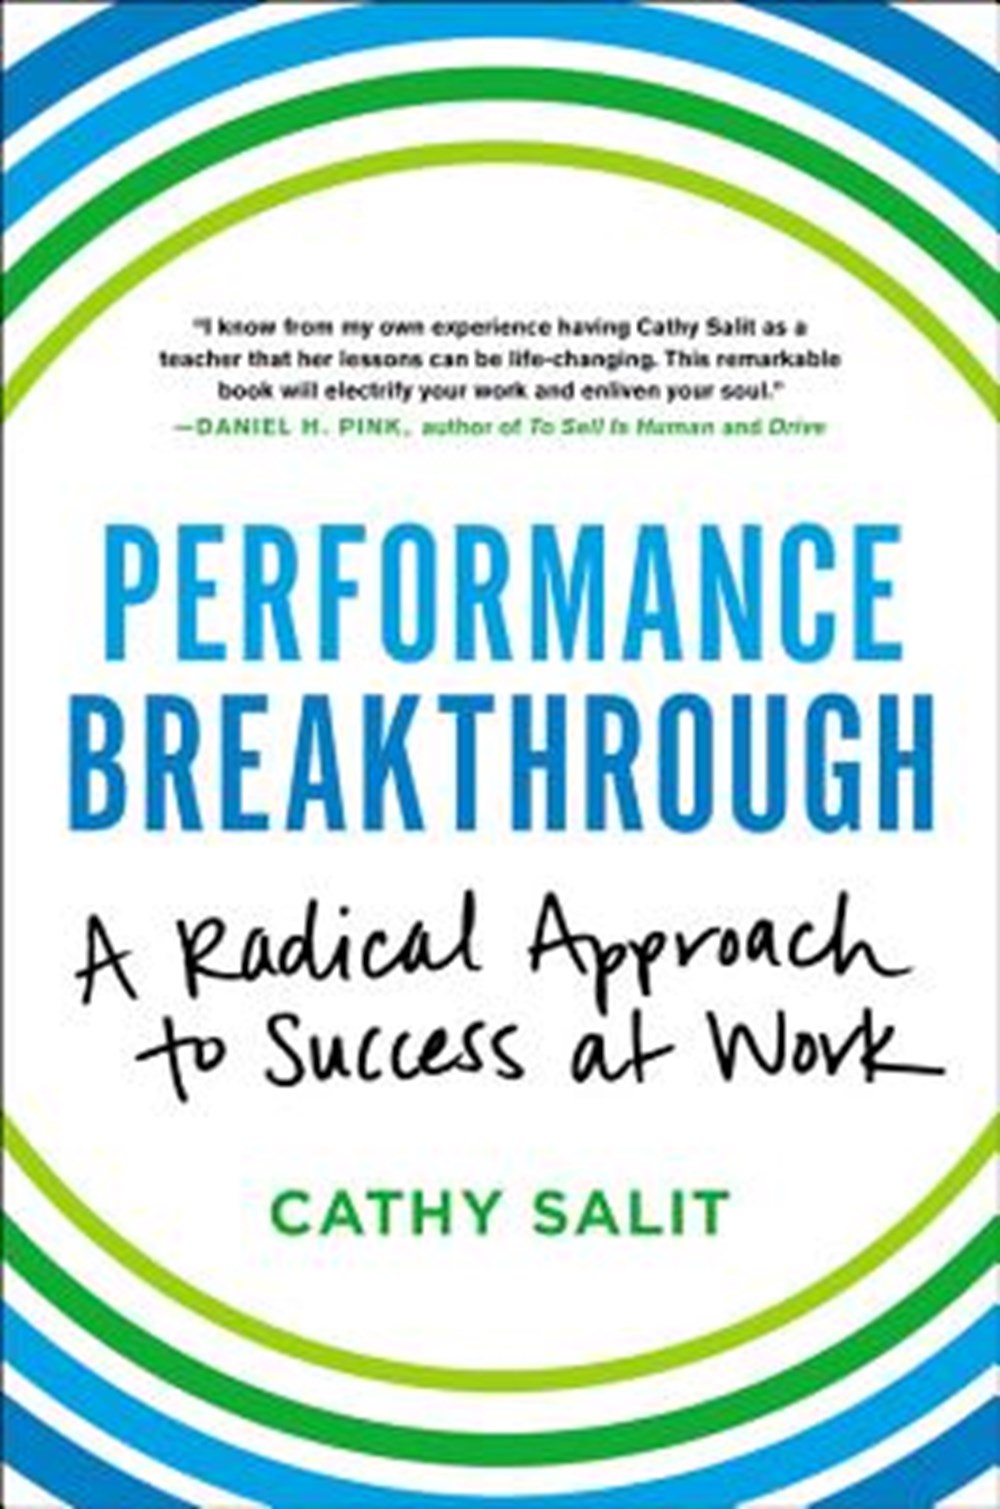 Performance Breakthrough A Radical Approach to Success at Work